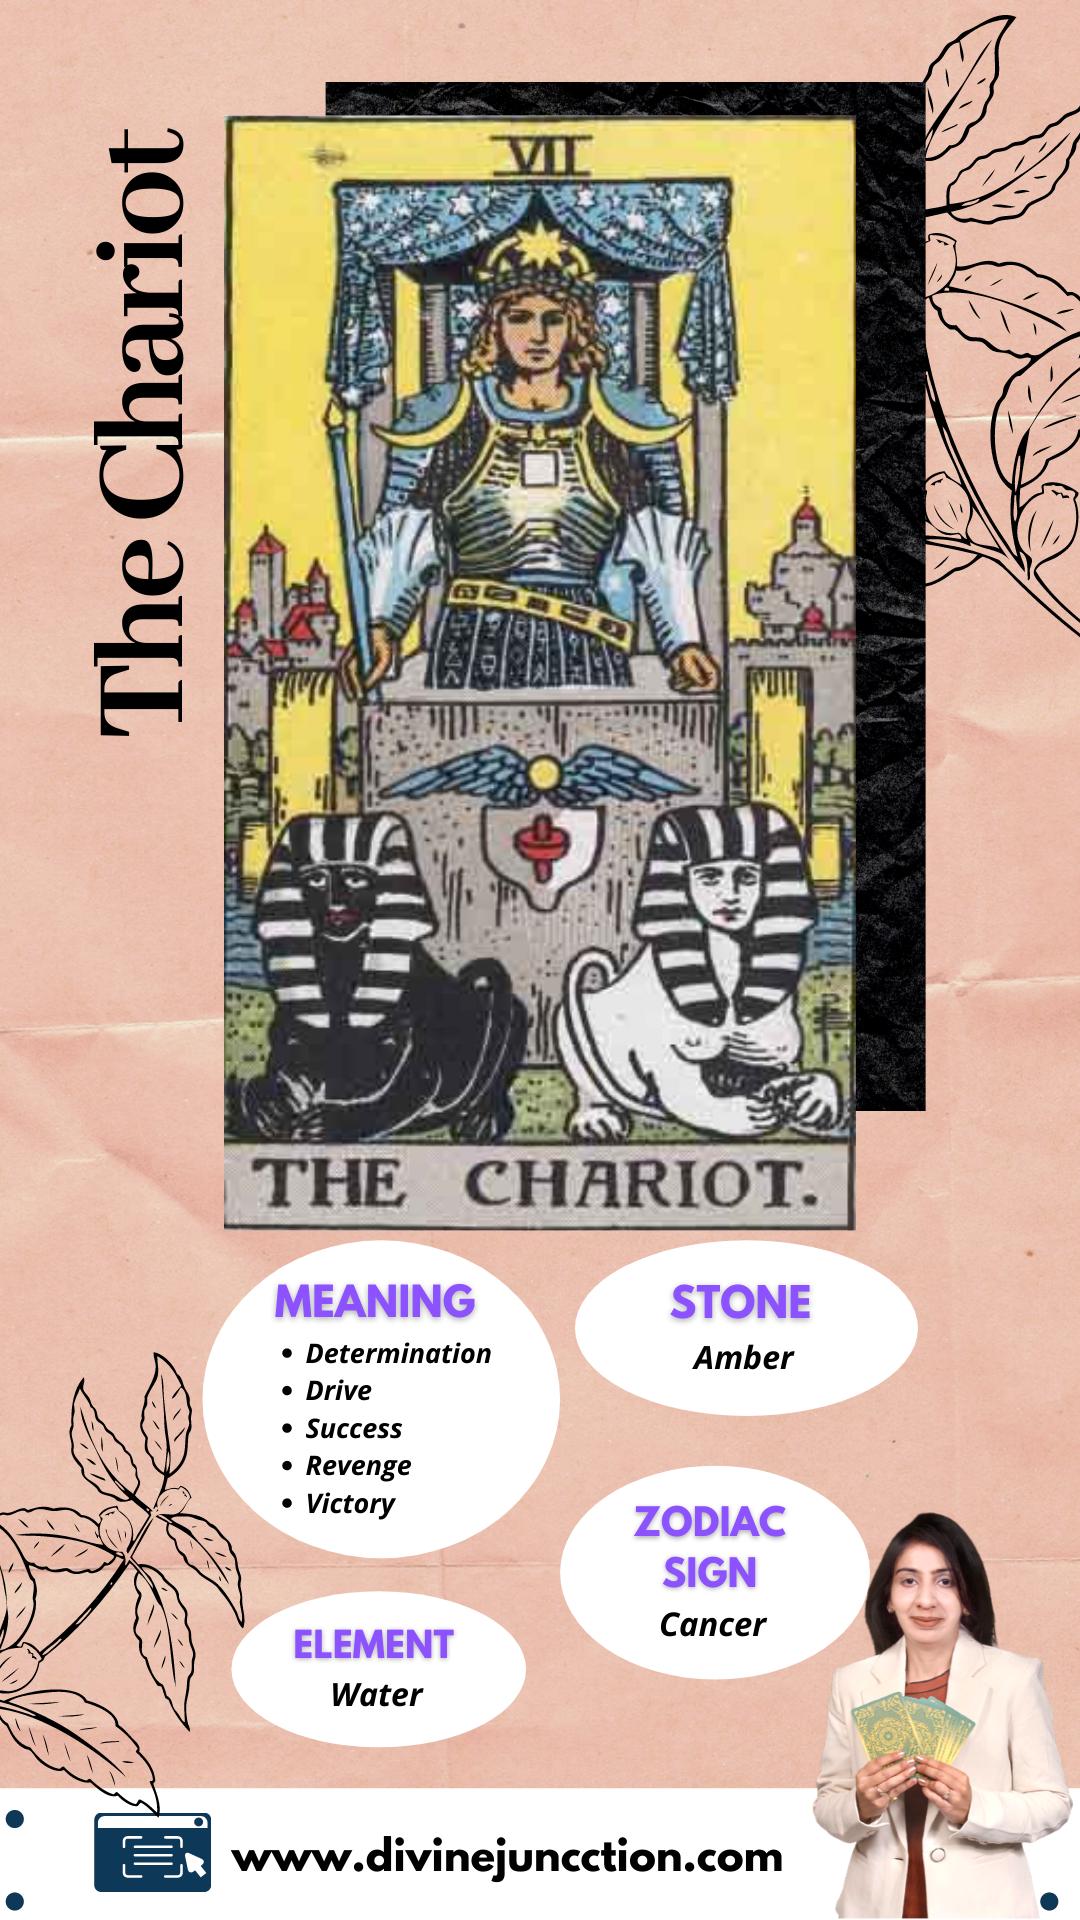 how to read the tarot cards